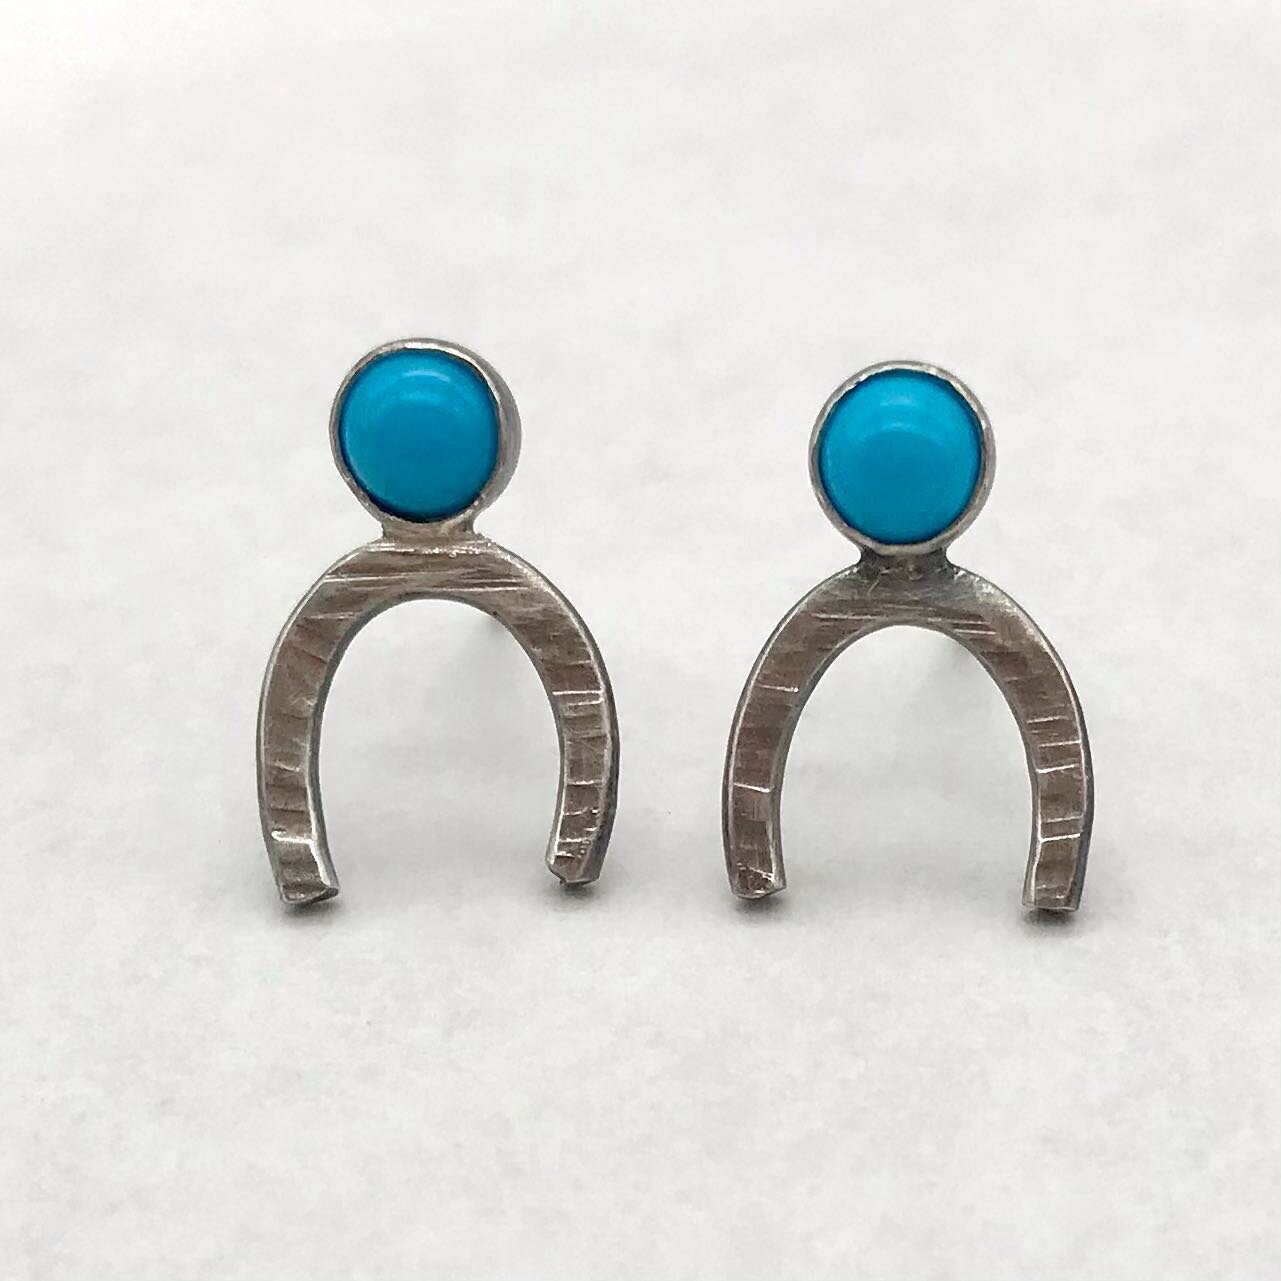 Lucky Horseshoe Turquoise Earrings seem like the perfect earring for today, at least for me. I&rsquo;m so lucky to have such lovely friends! Thanks, pals! 🥰 #friends #sustainablejewelry #turquoise #megtangjewelry www.megtang.com